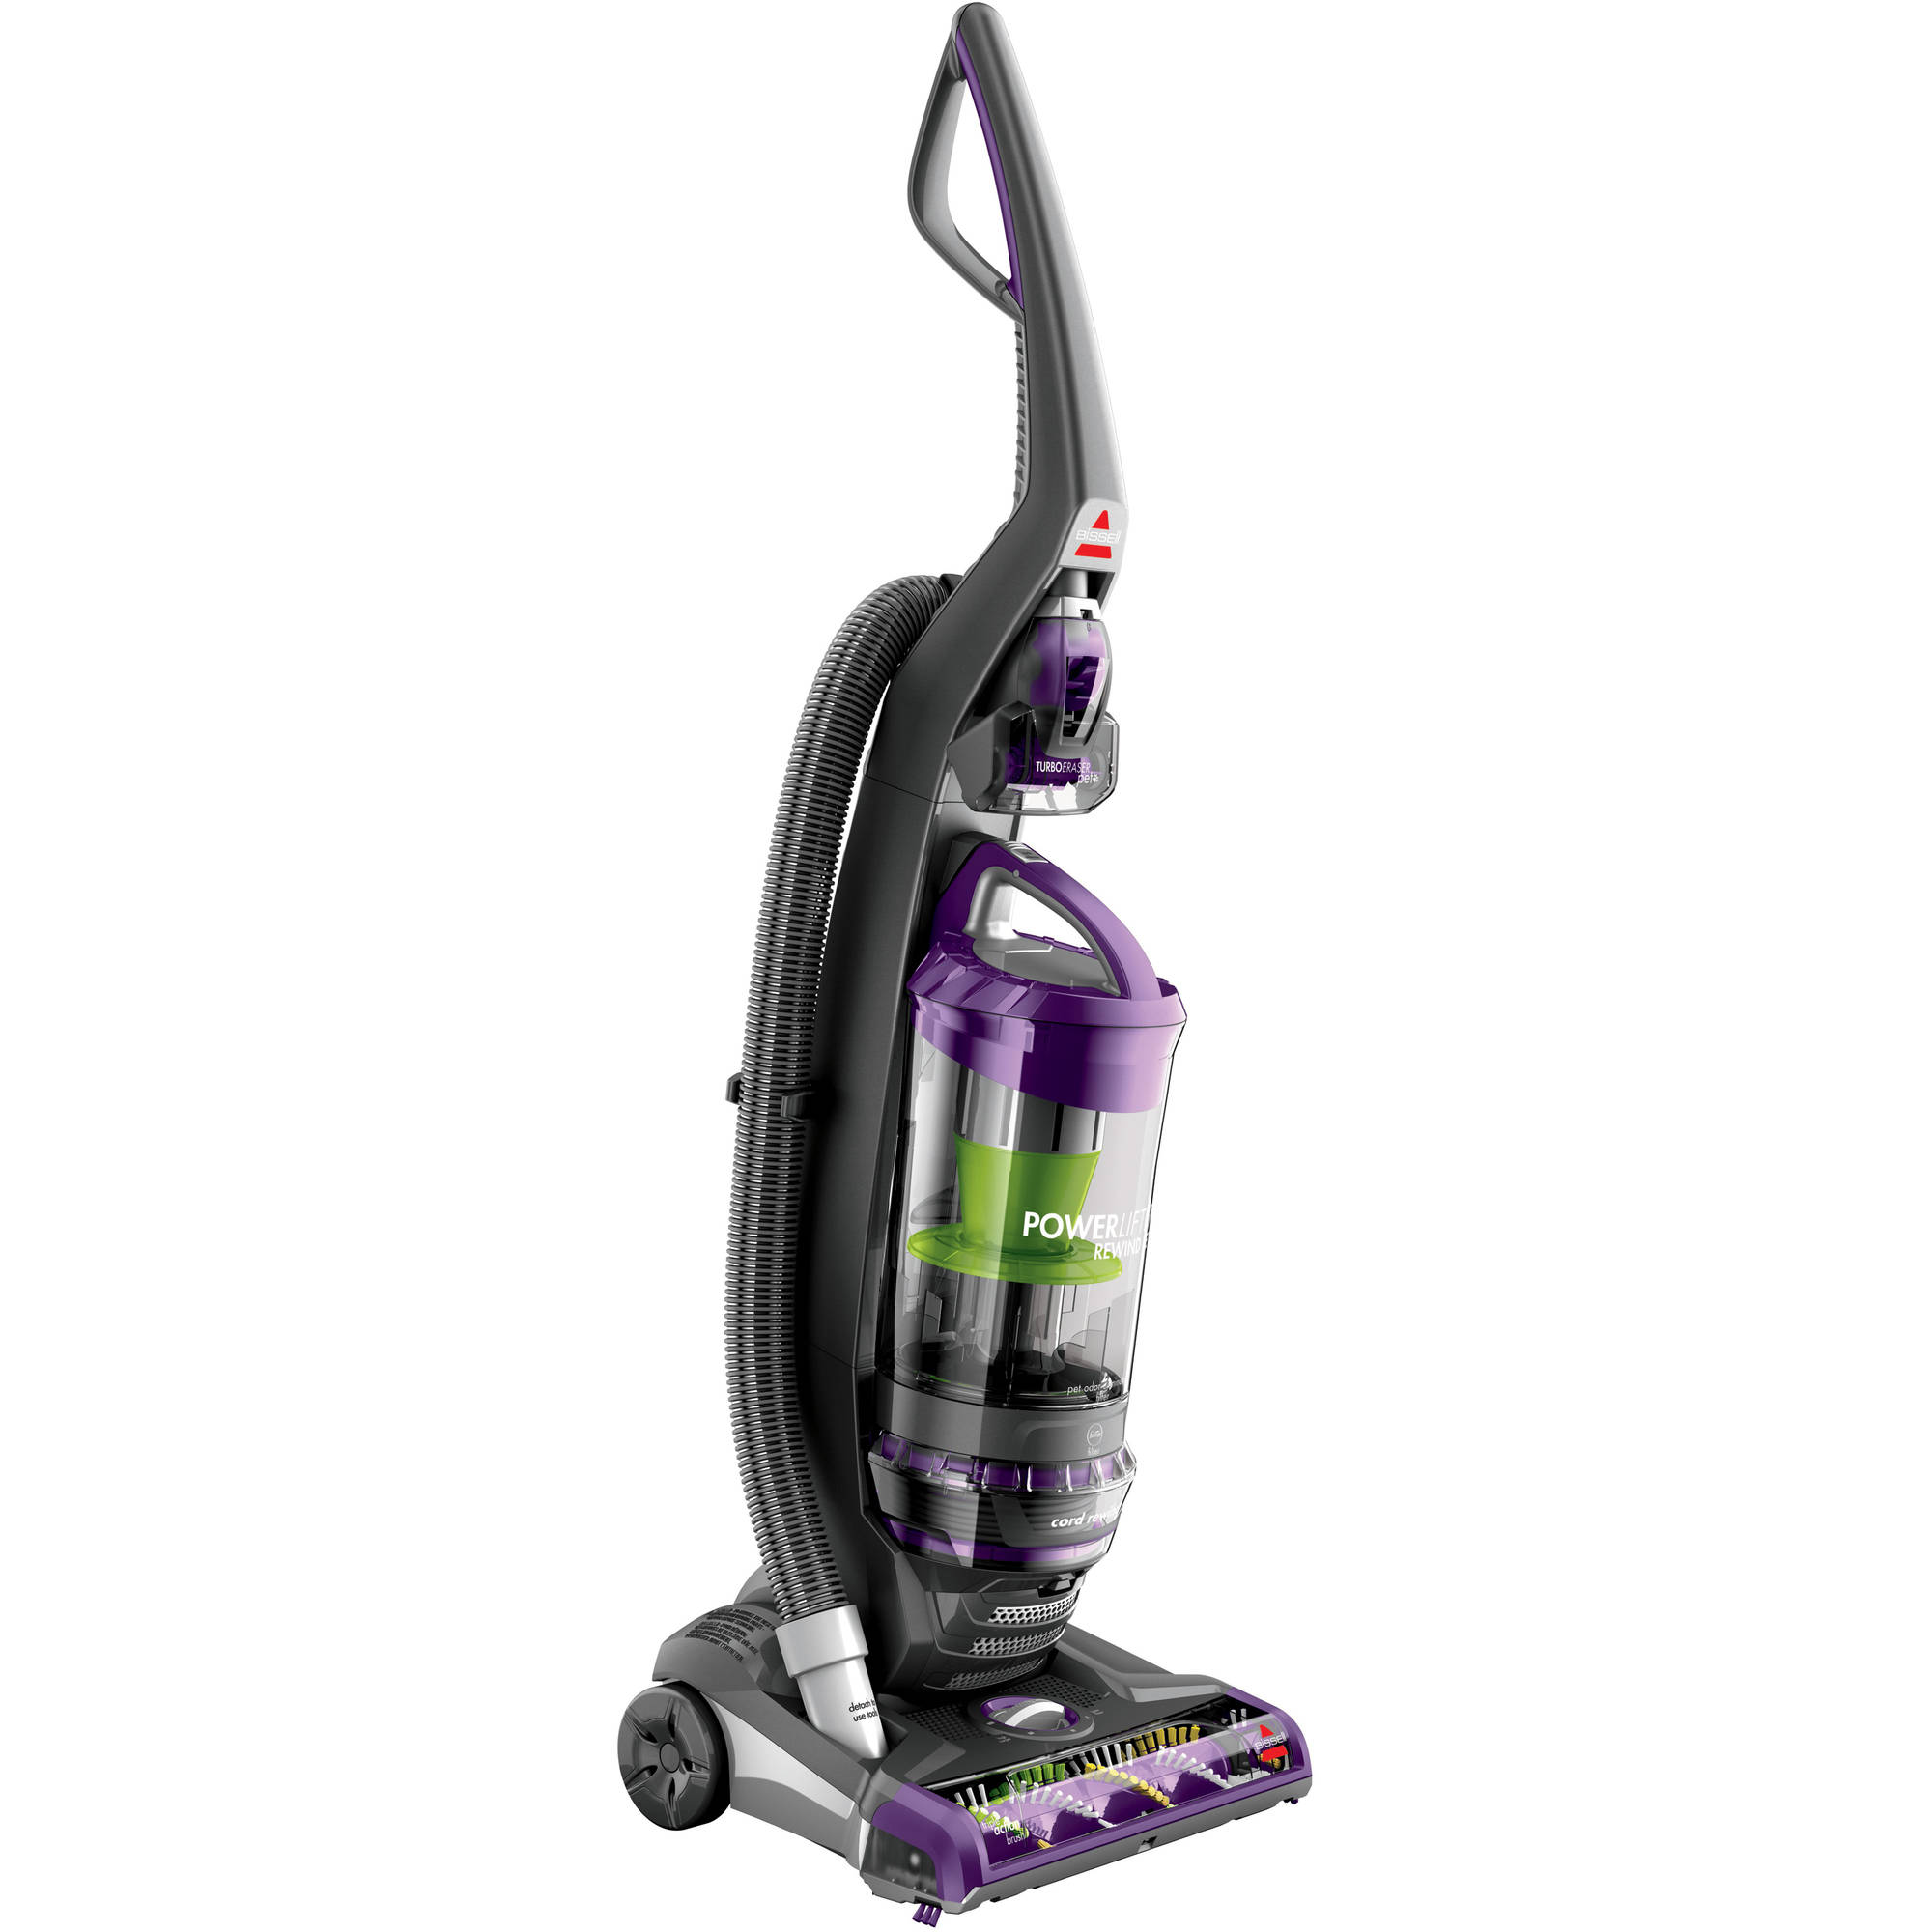 Bissell PowerLifter Pet Rewind Bagless Upright Vacuum Cleaner, 1792 - image 3 of 9